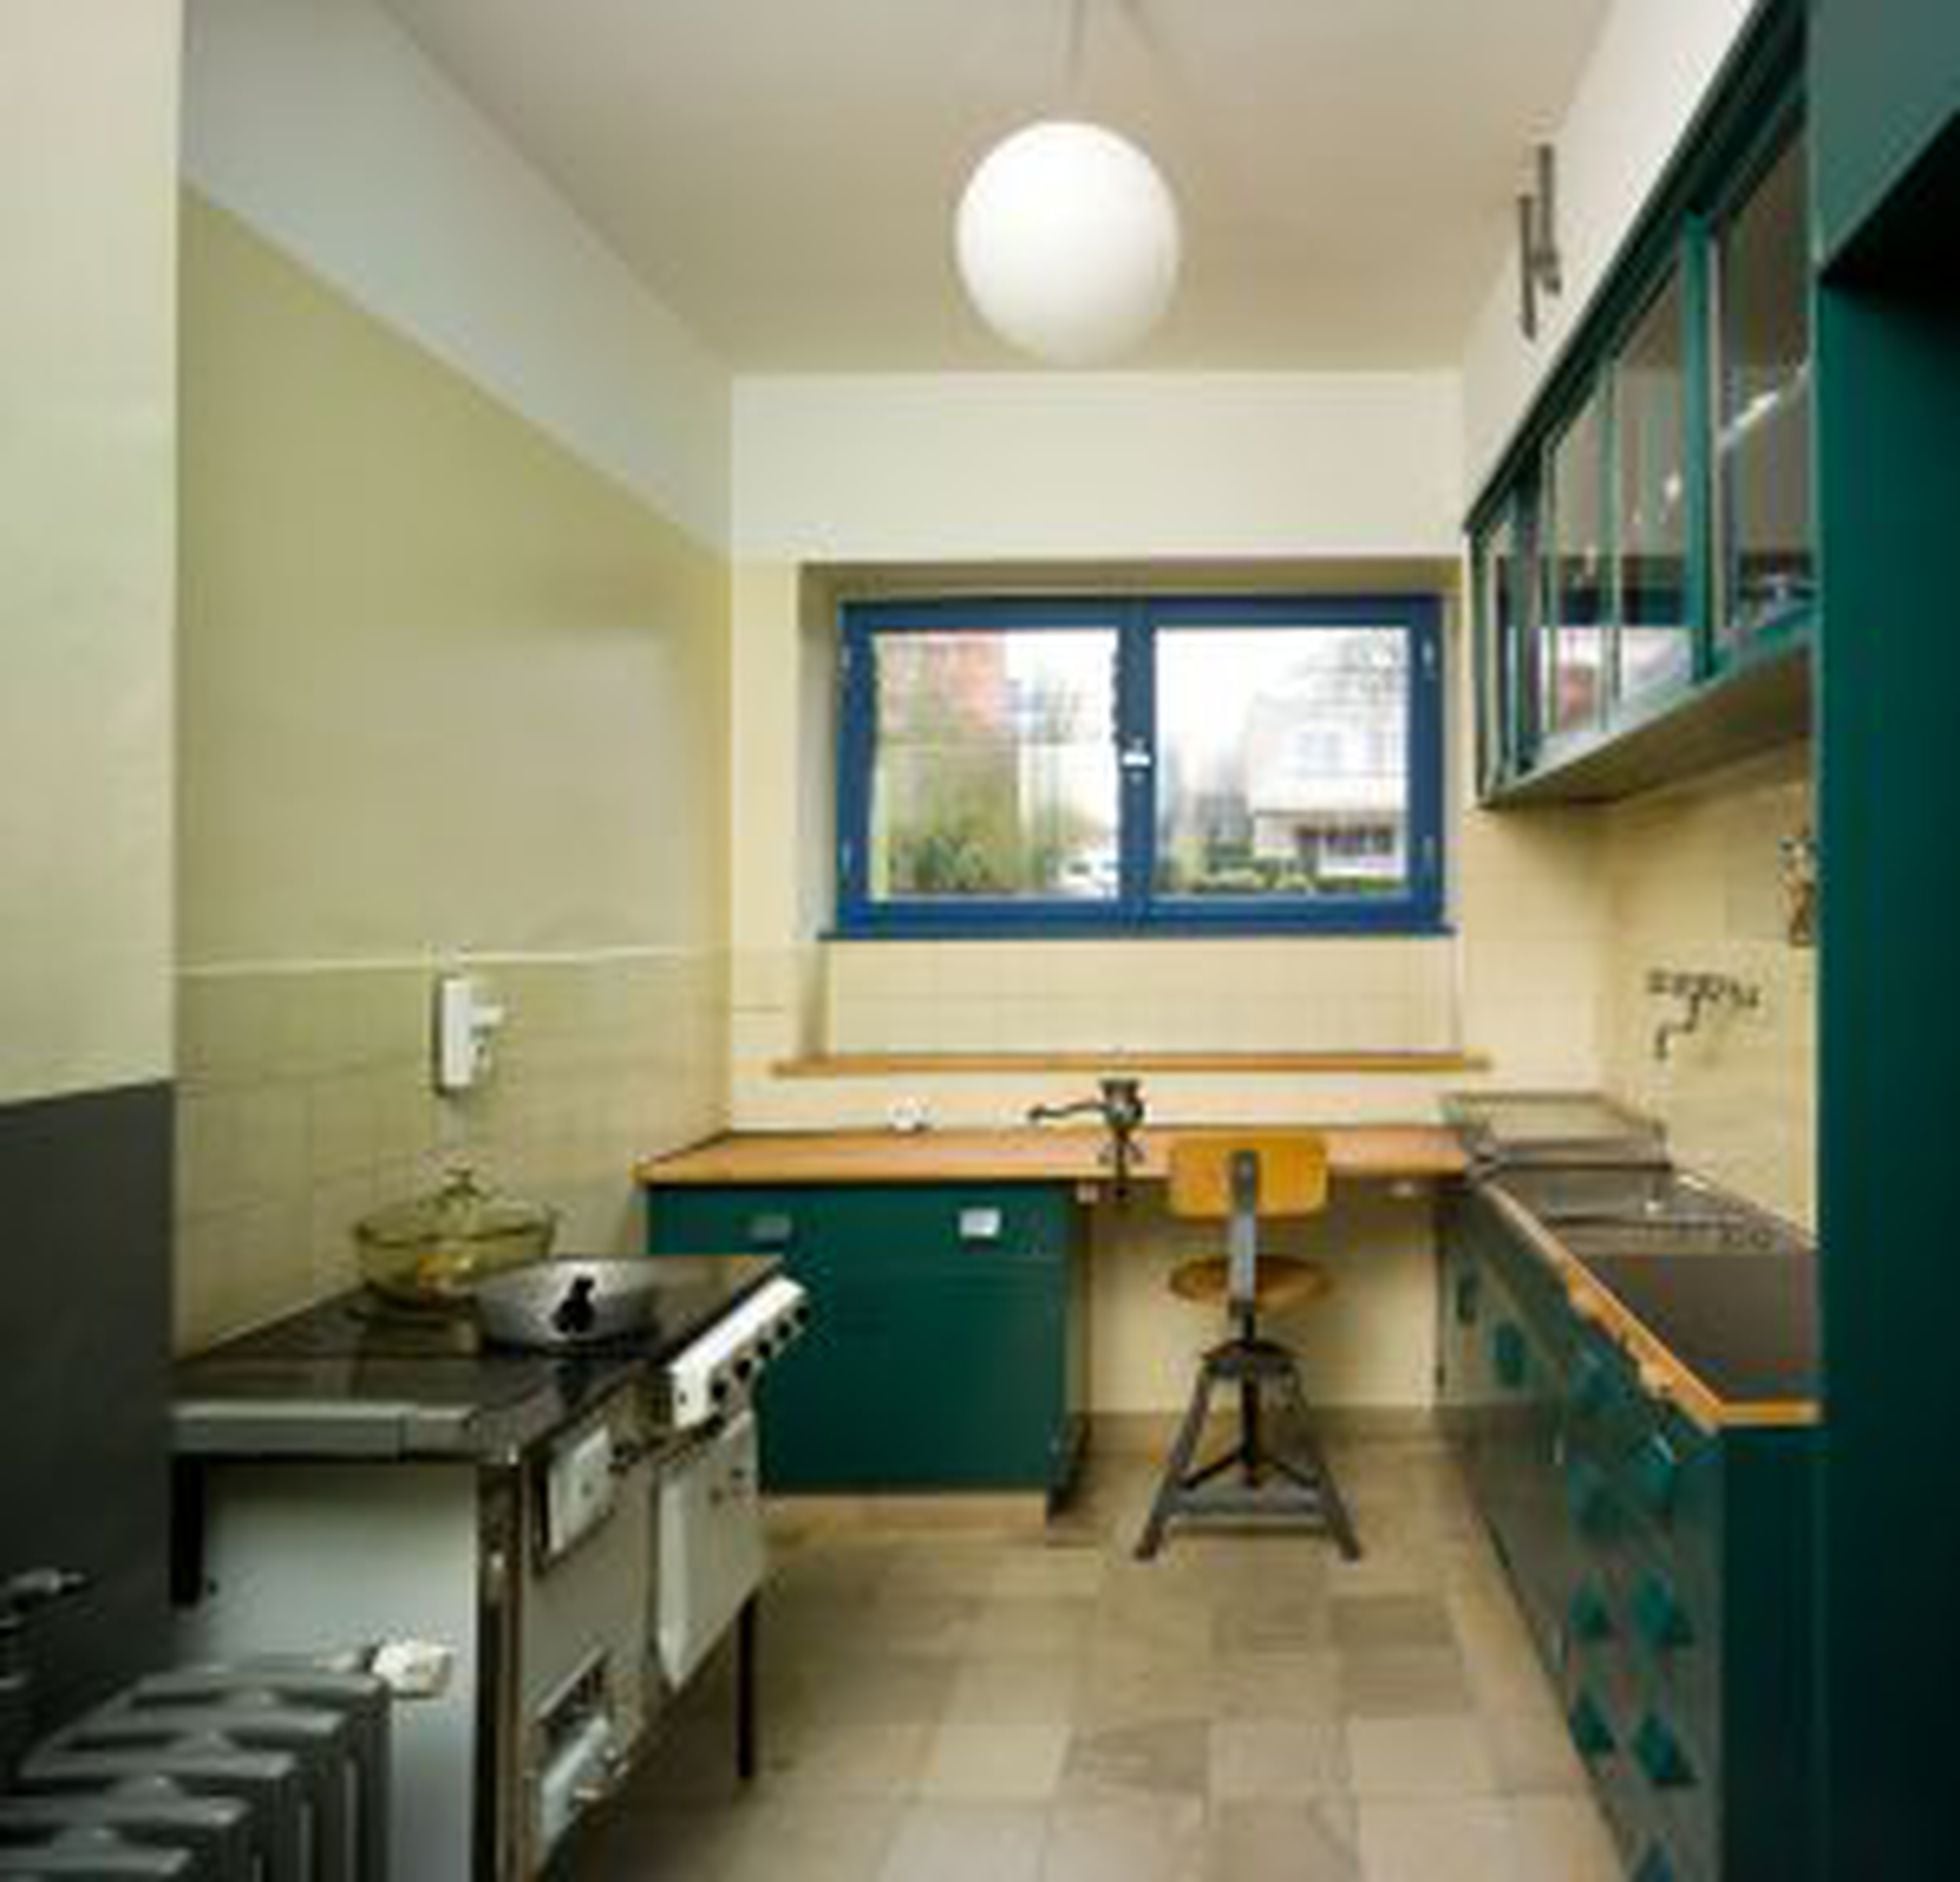 The apartment of the visionary who designed your kitchen | Culture | EL  PAÍS English